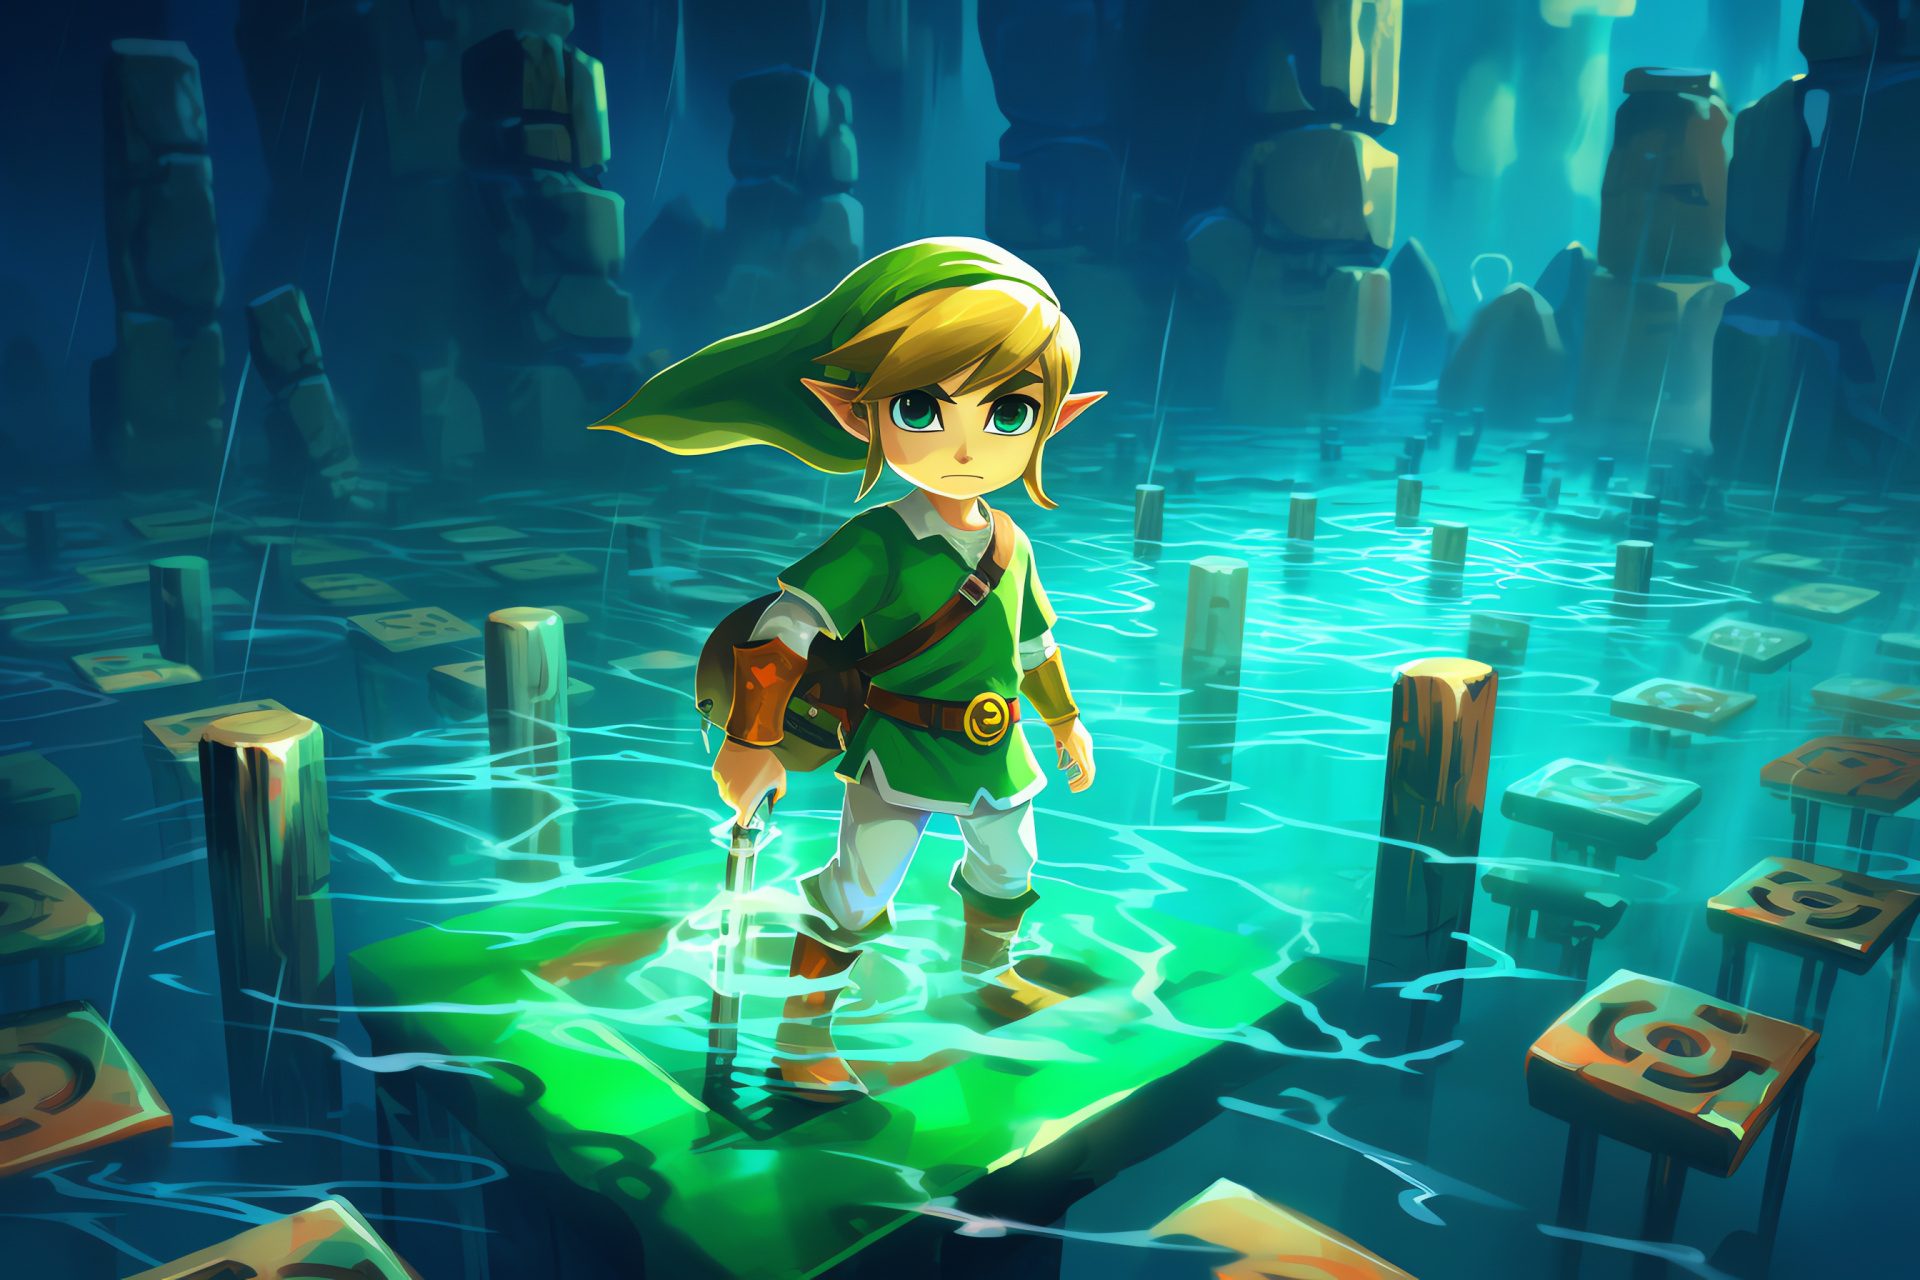 Toon Link, Wind Temple, Stylized fantasy, Aerial platforms, Game-level environment, HD Desktop Wallpaper